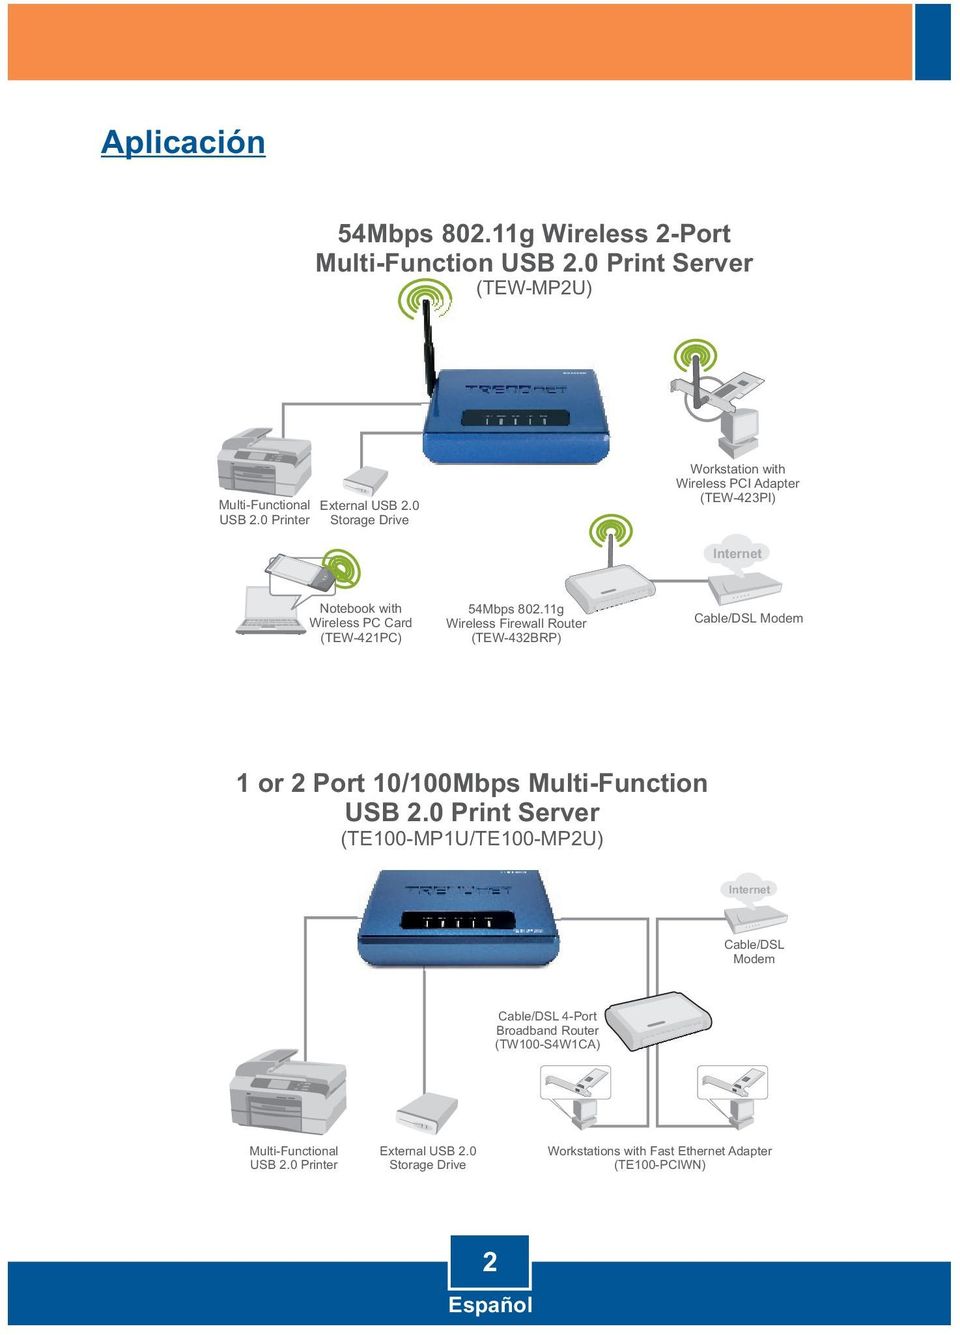 11g Wireless Firewall Router (TEW-432BRP) Cable/DSL Modem 1 or 2 Port 10/100Mbps Multi-Function USB 2.